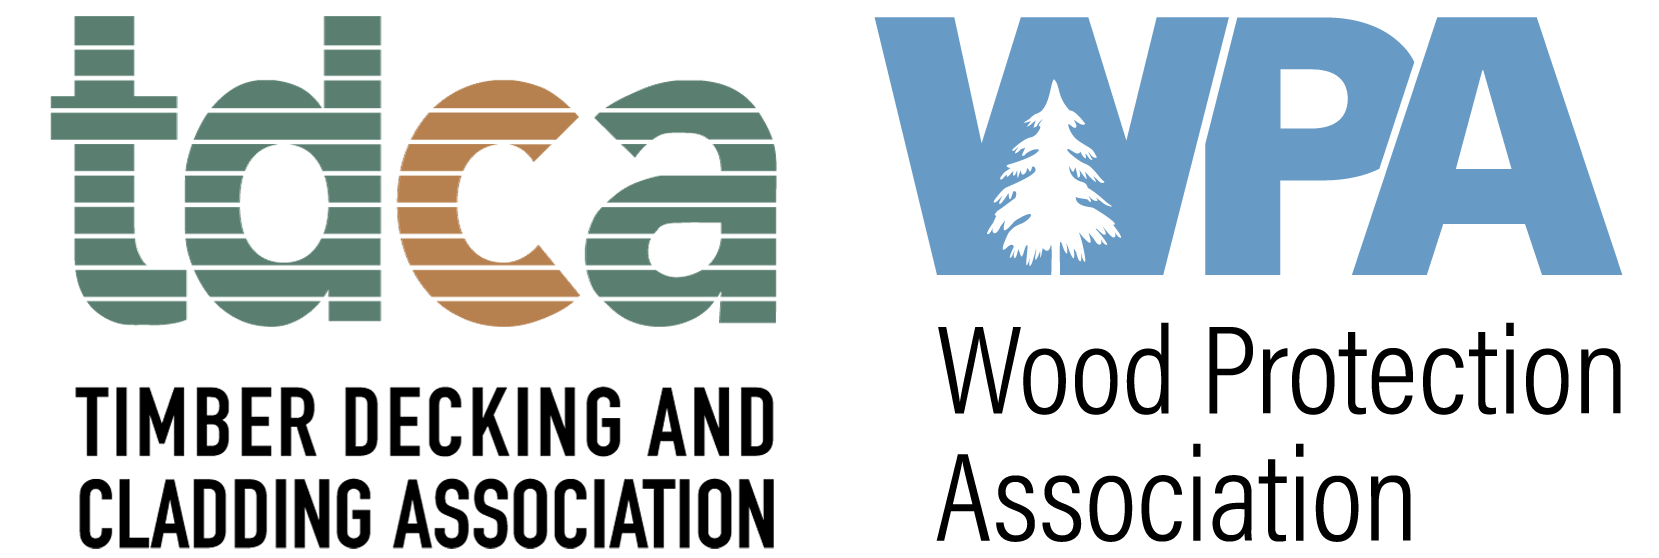 The Timber Decking & Cladding Association (TDCA) / The Wood Protection Association (WPA) logo